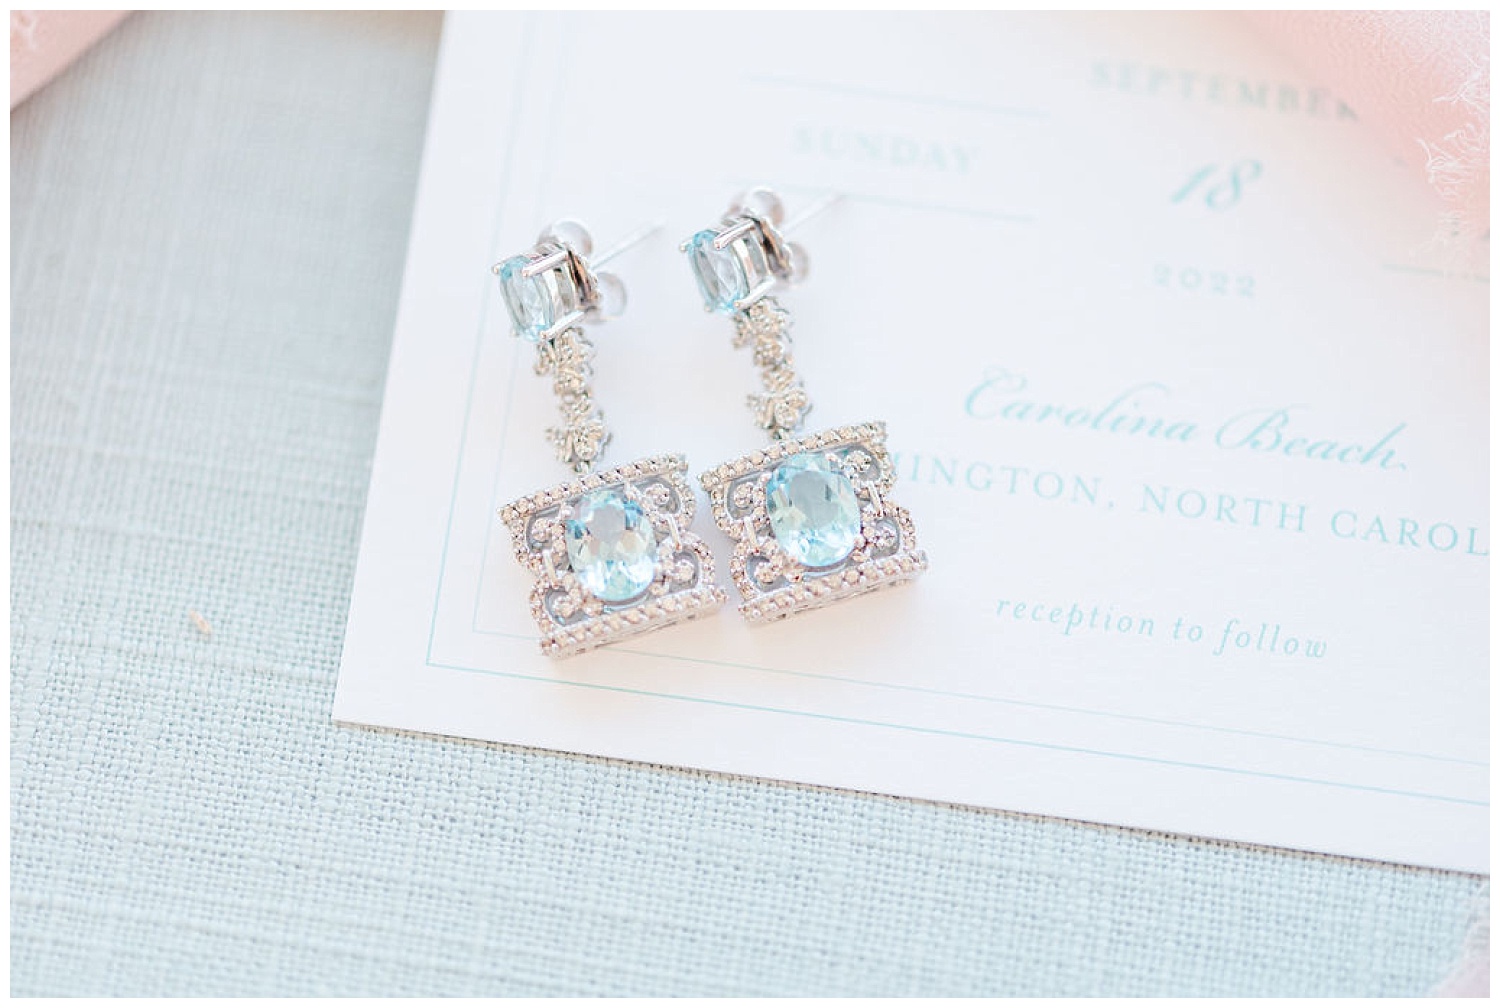 crystal and light blue earrings sitting on a invitation suite